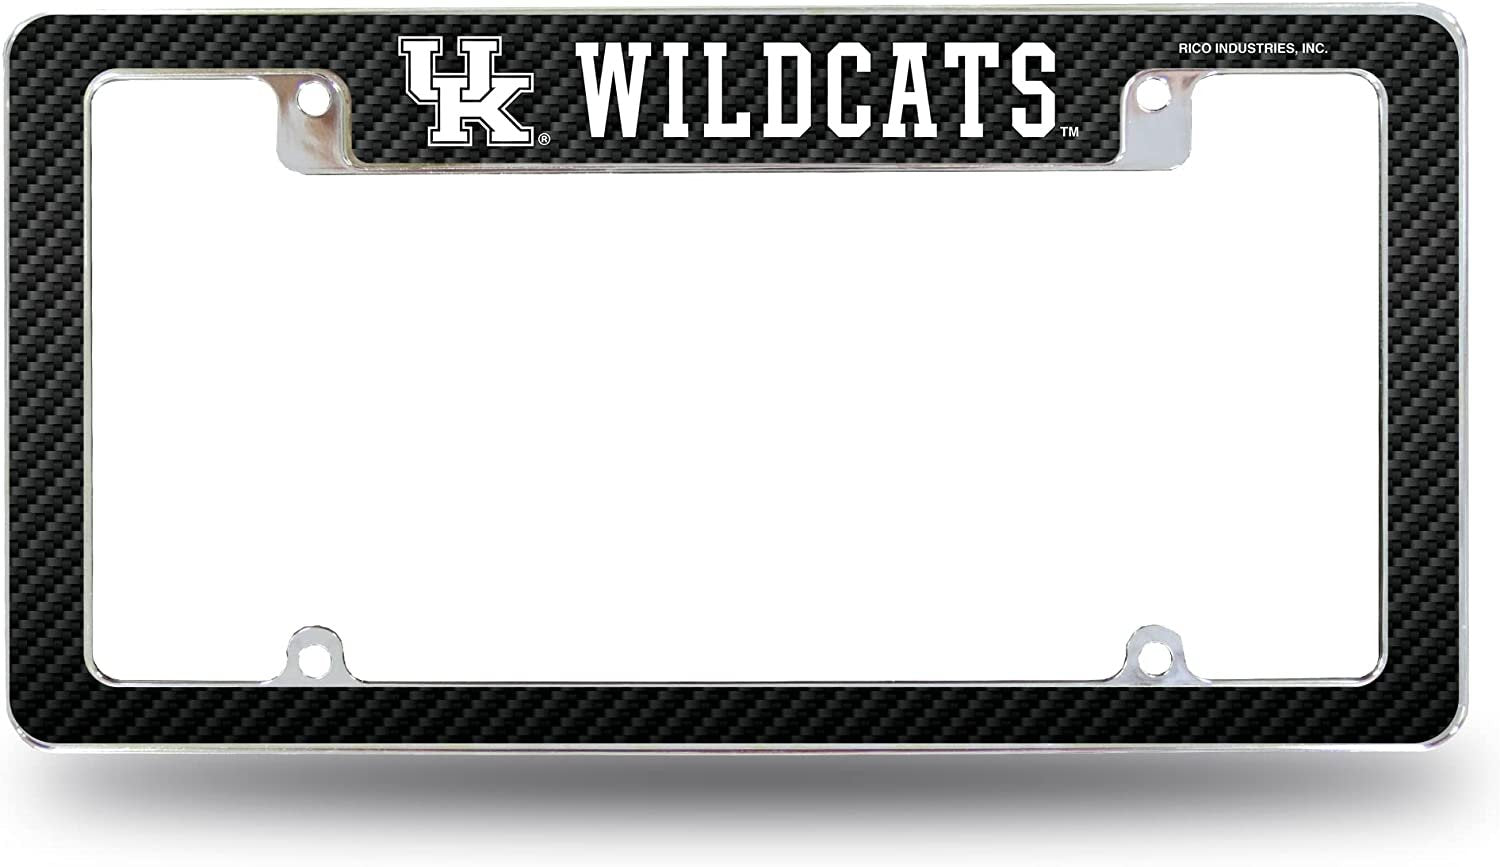 University of Kentucky Wildcats Metal License Plate Frame Chrome Tag Cover Carbon Fiber Design 6x12 Inch